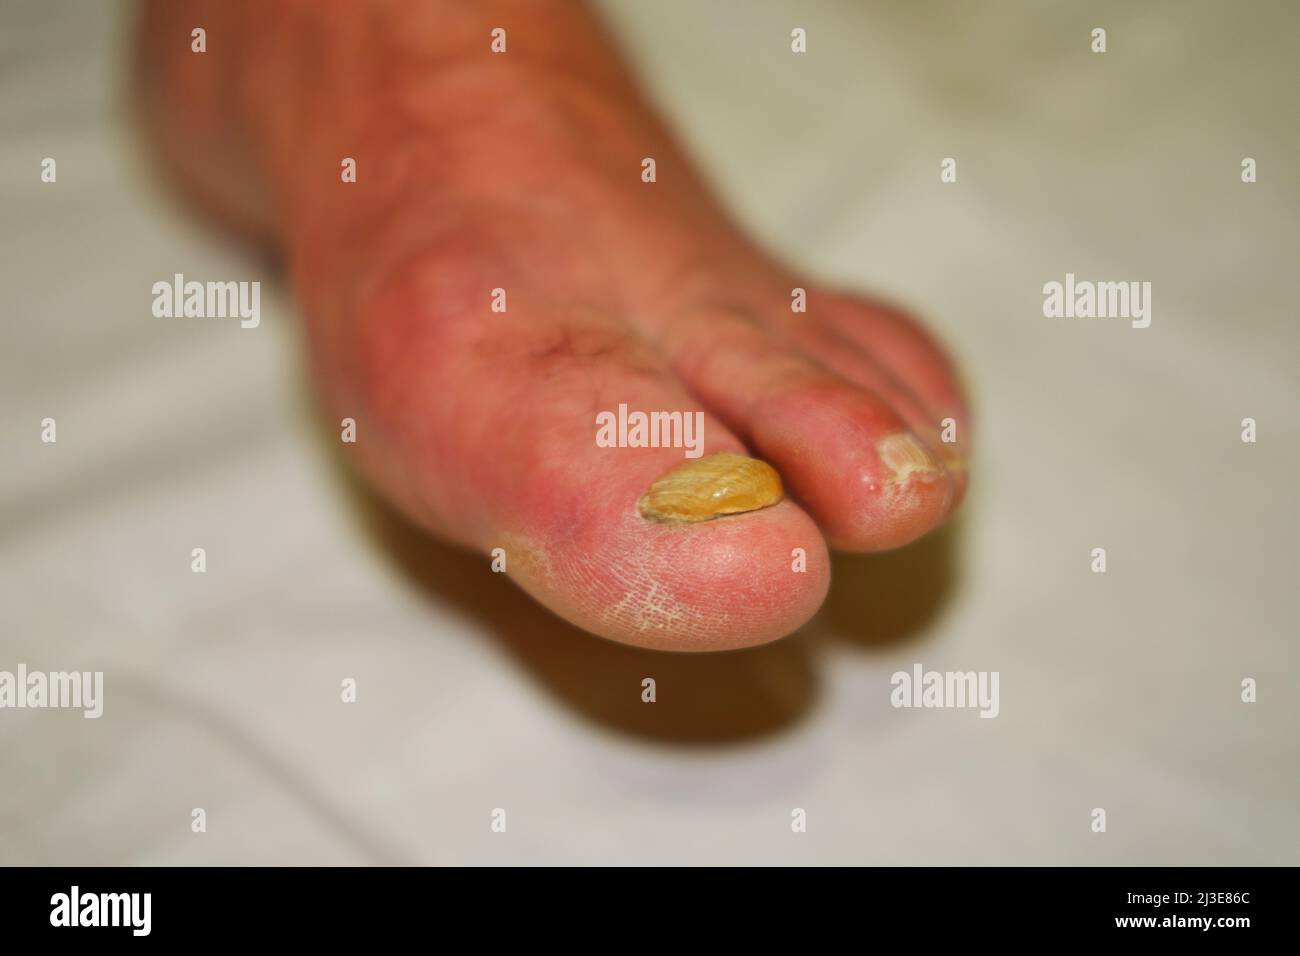 Toenails with fungal nail infection Stock Photo